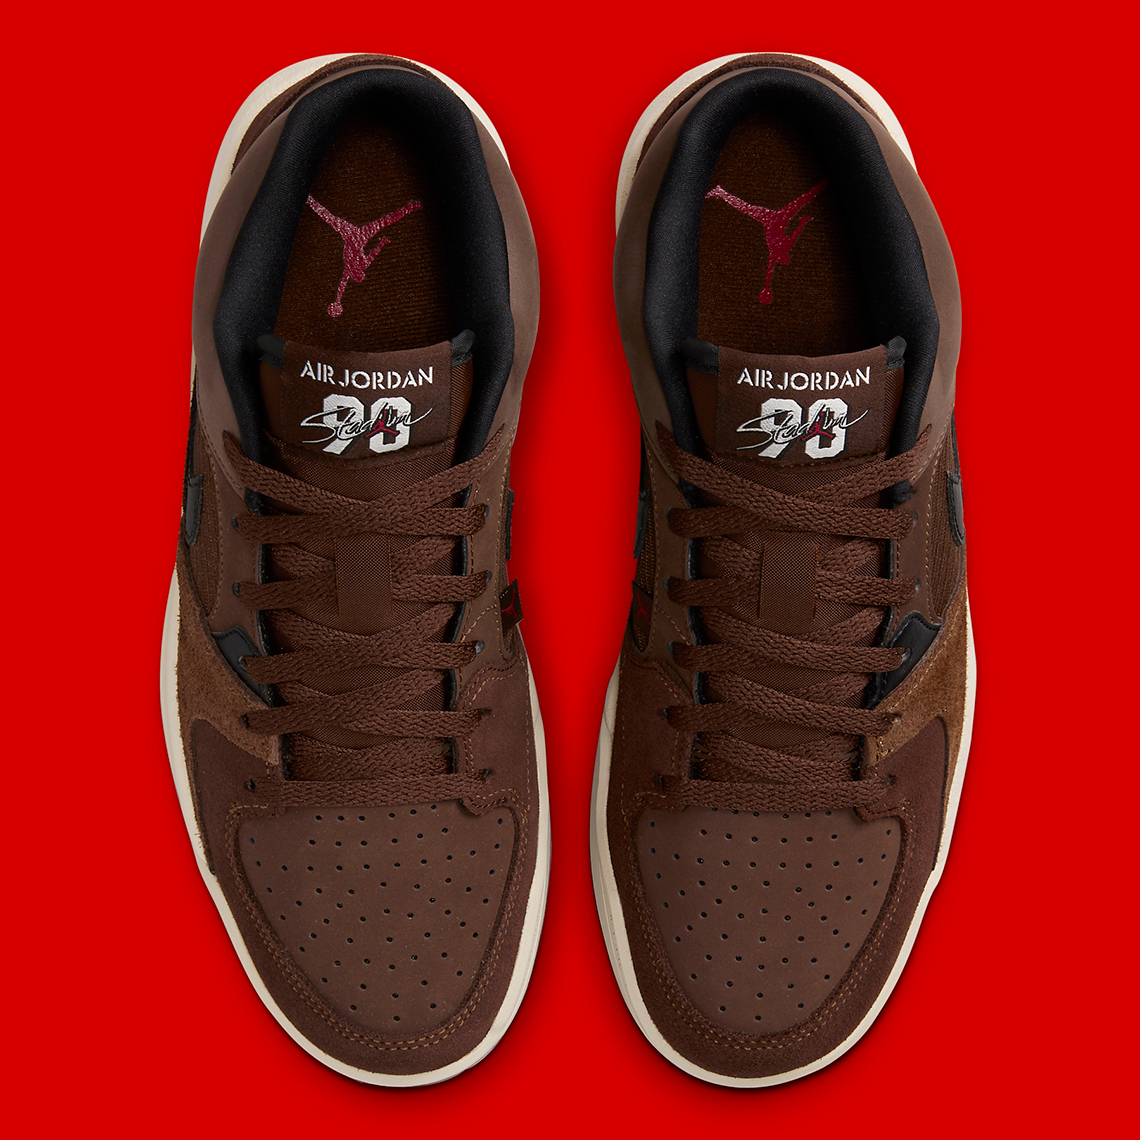 Jordan Brand has Retrod many of their most iconic Baroque Brown Dx4397 200 1